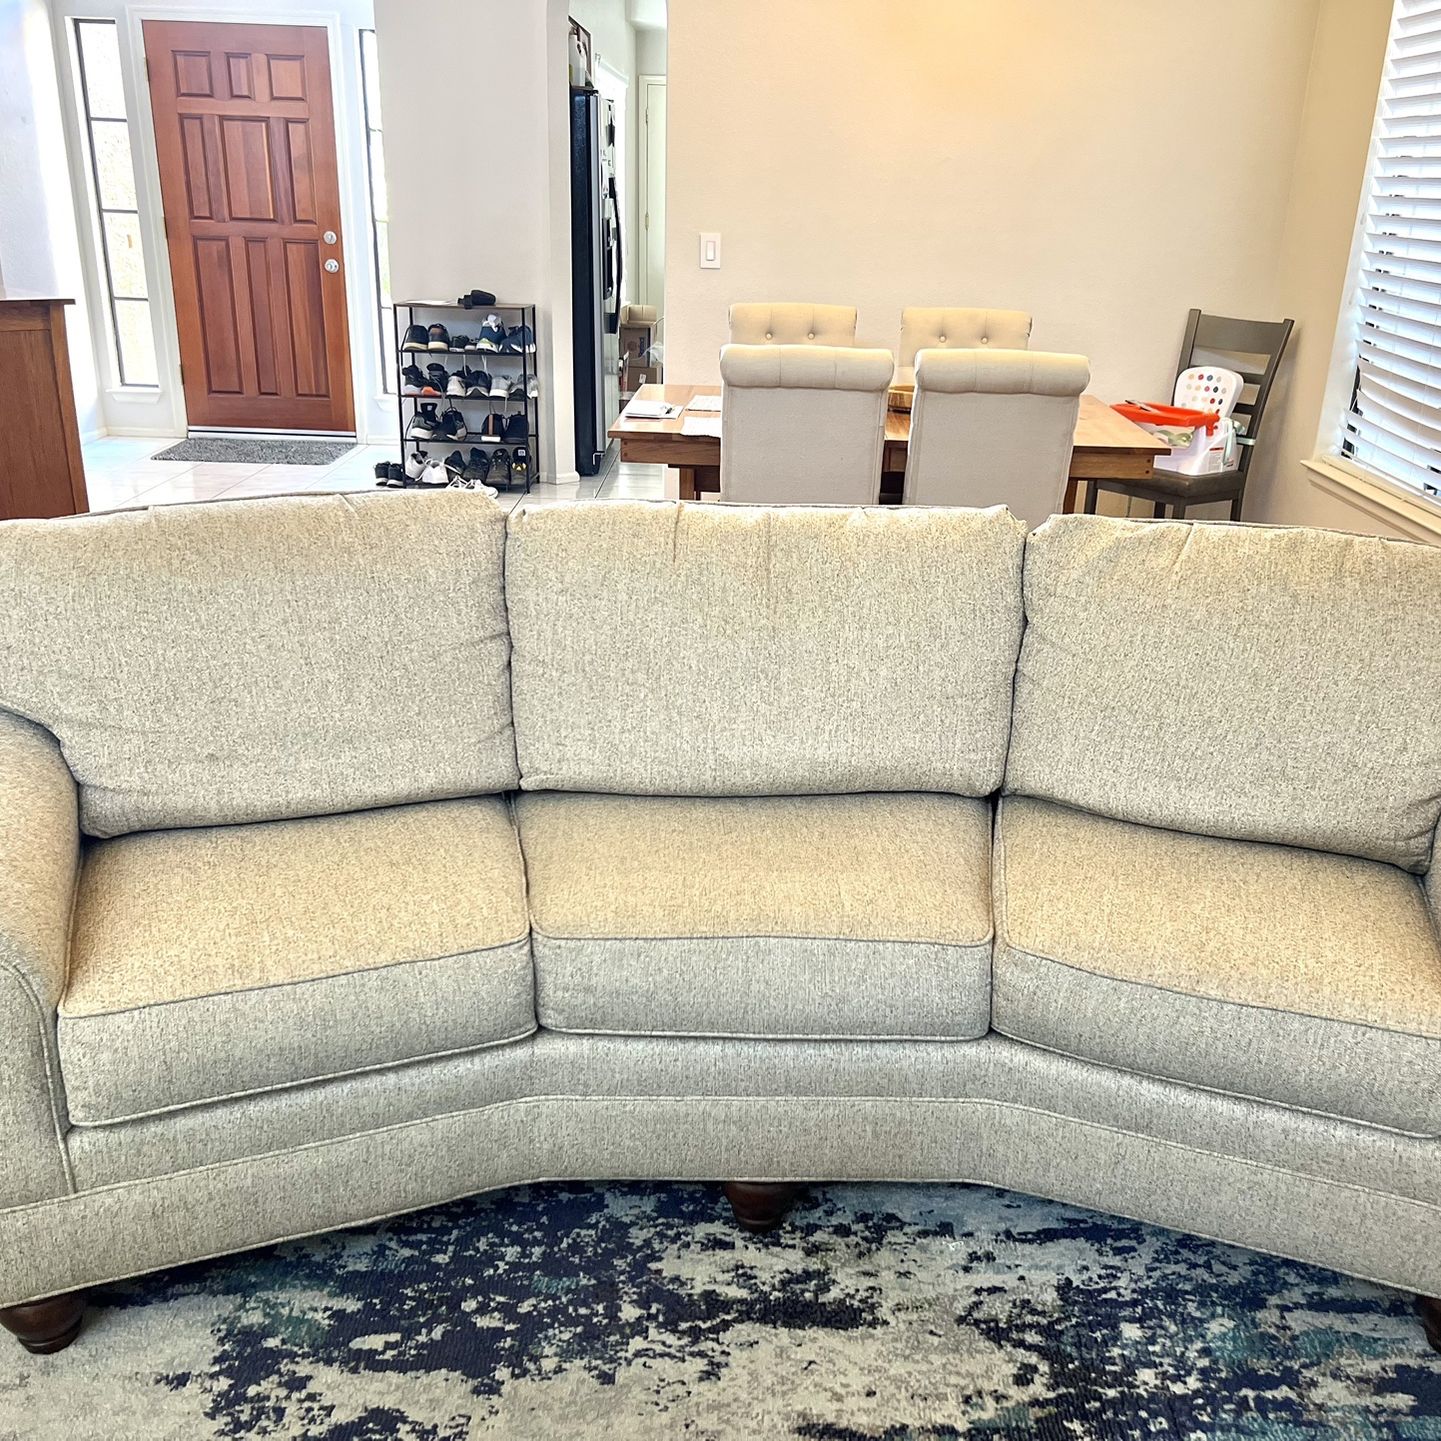 Beautiful Curved 3-cushion Couch For Sale!